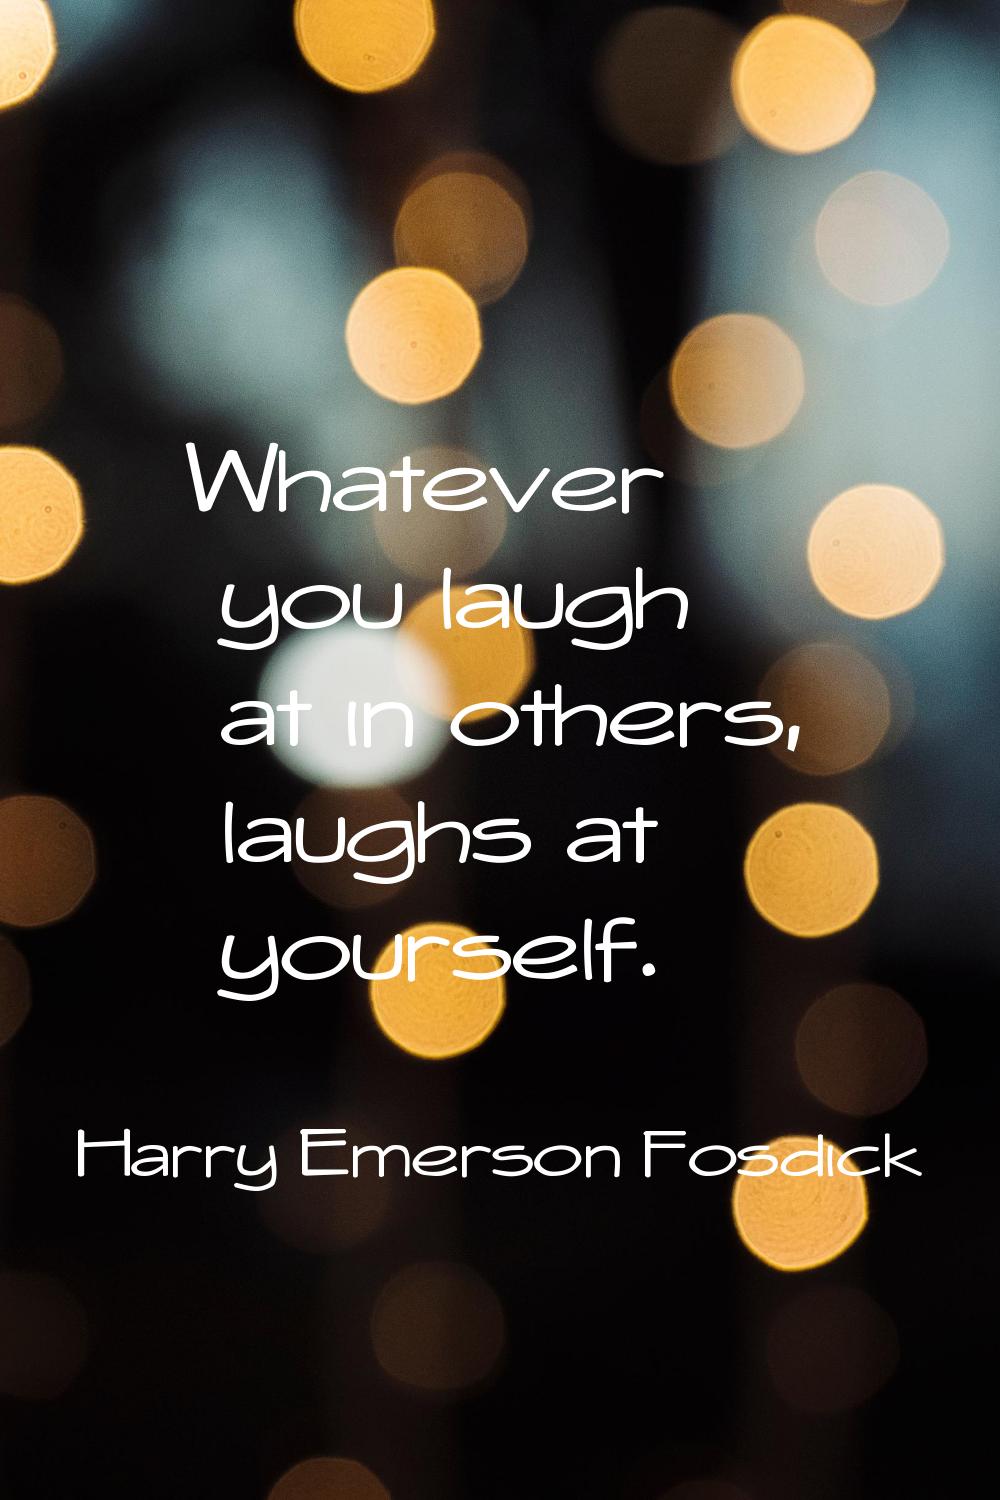 Whatever you laugh at in others, laughs at yourself.